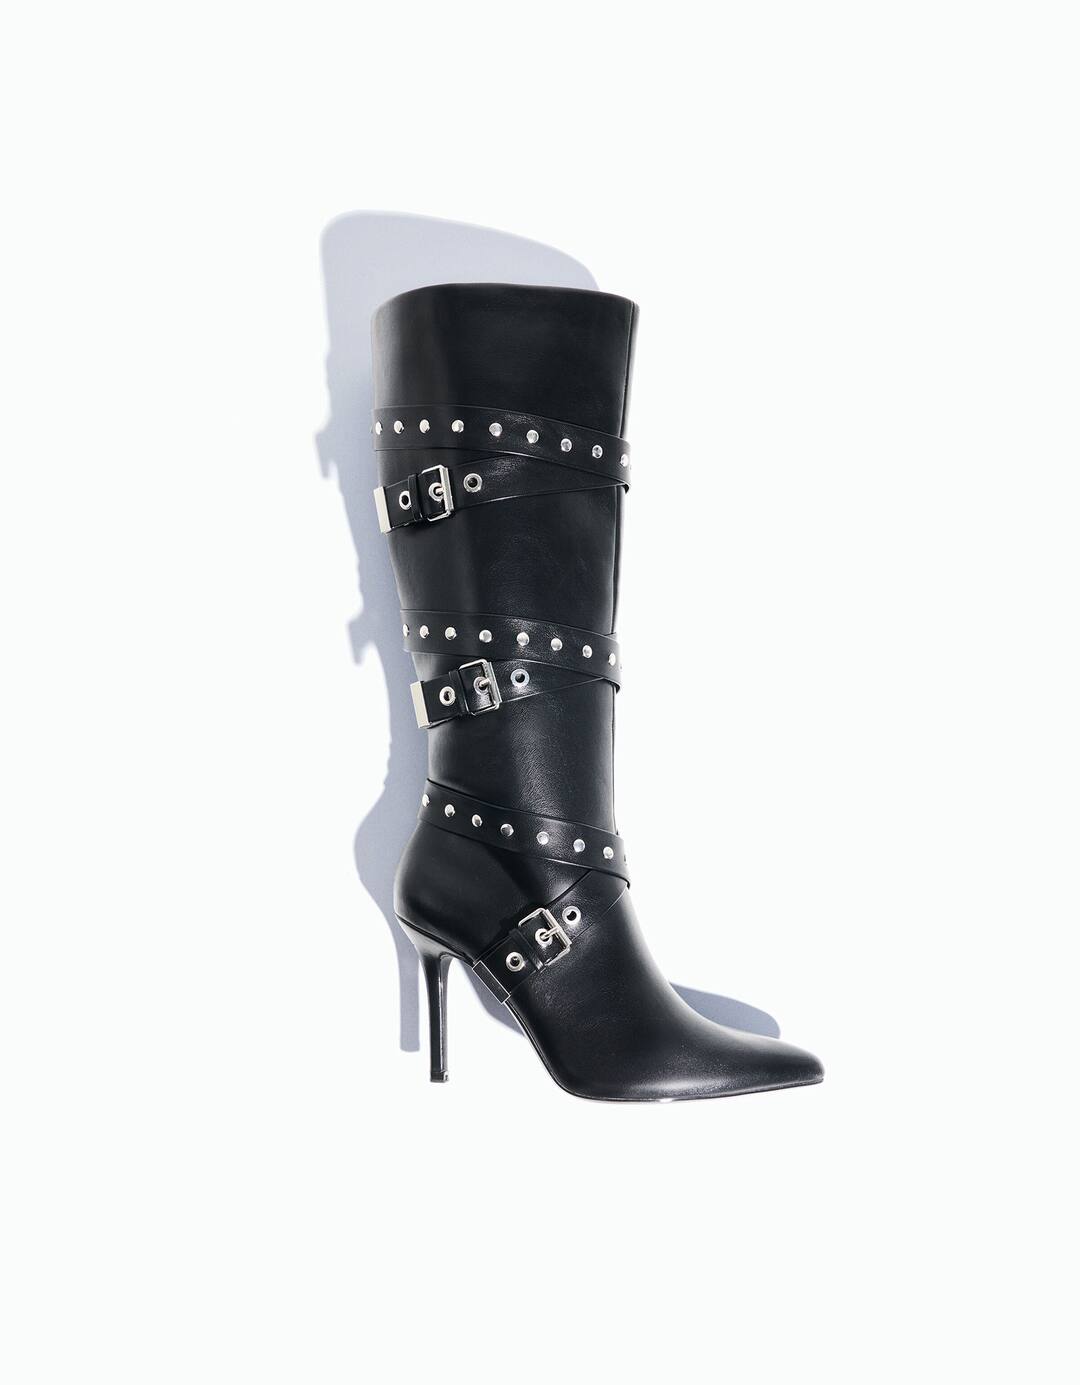 High-heel boots with studded and buckled straps